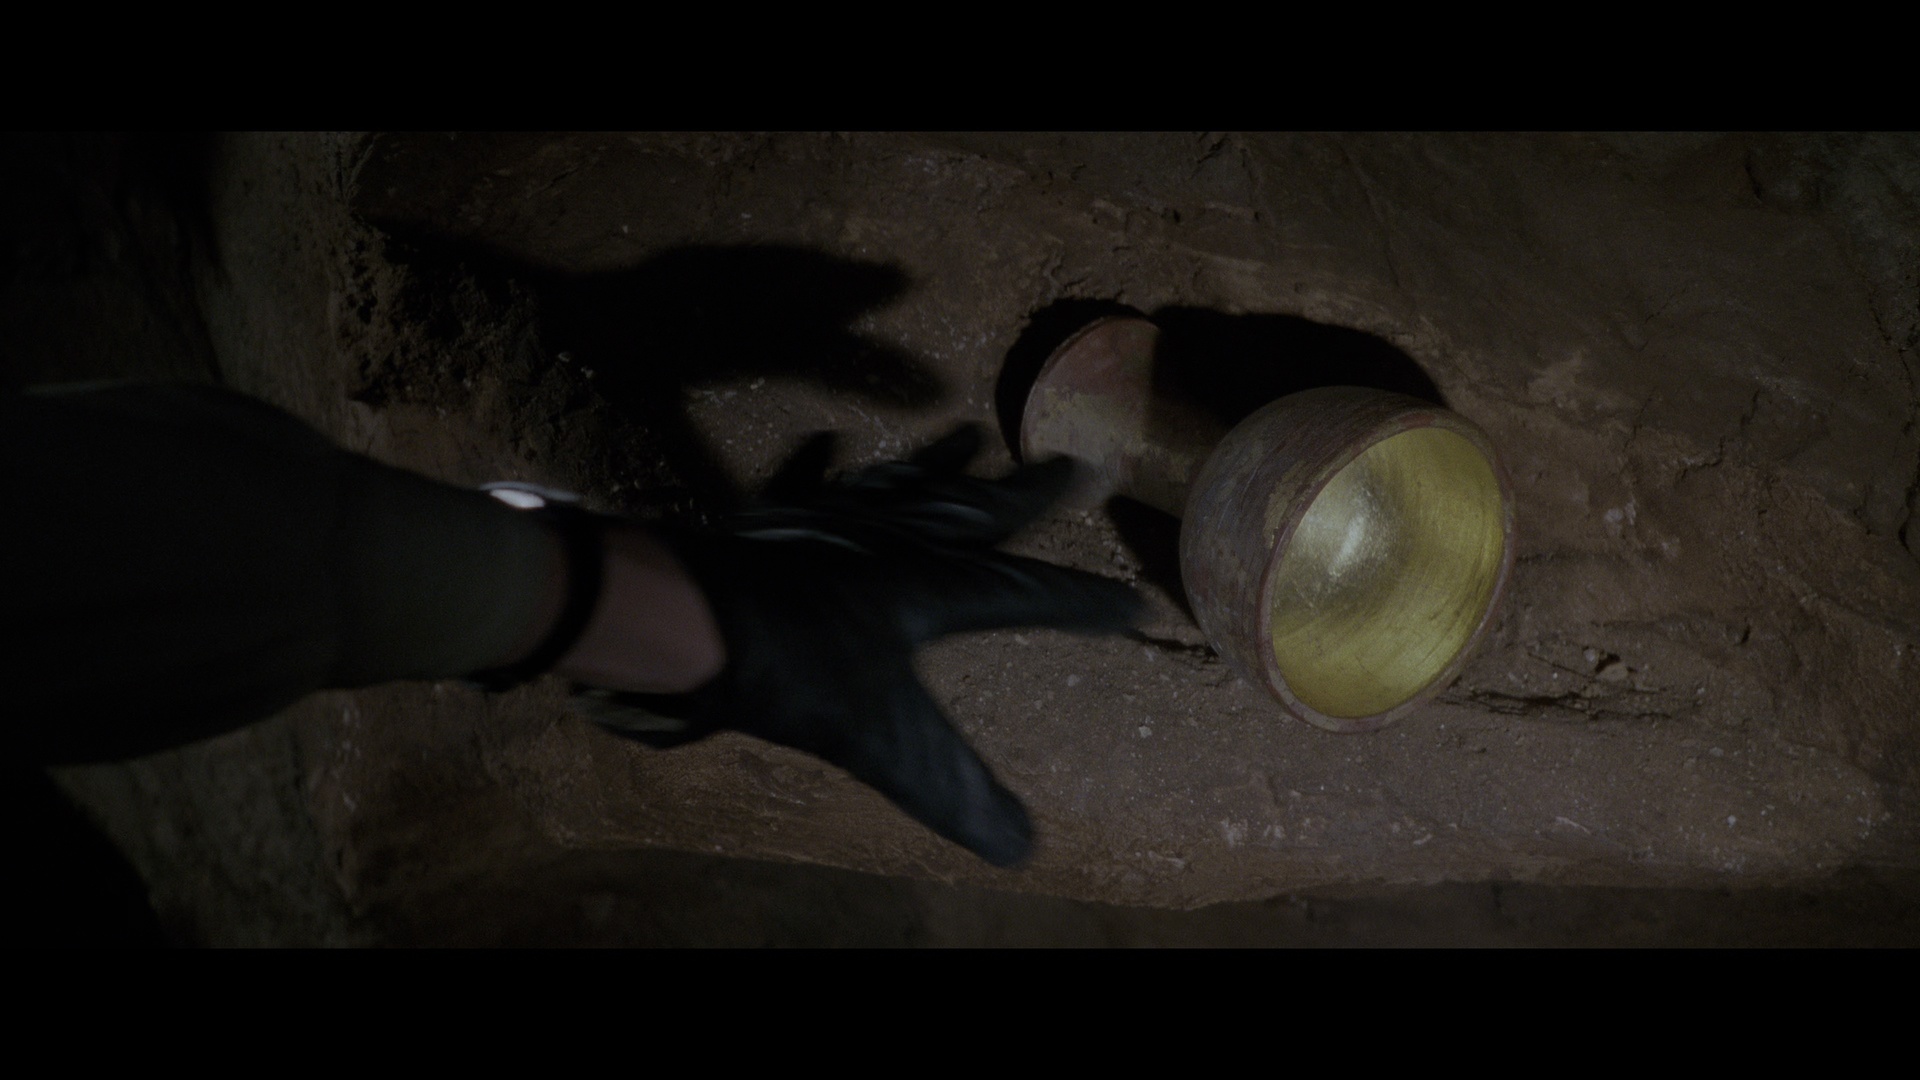 INDIANA JONES AND THE LAST CRUSADE - SFX Holy Grail - Image 17 of 17